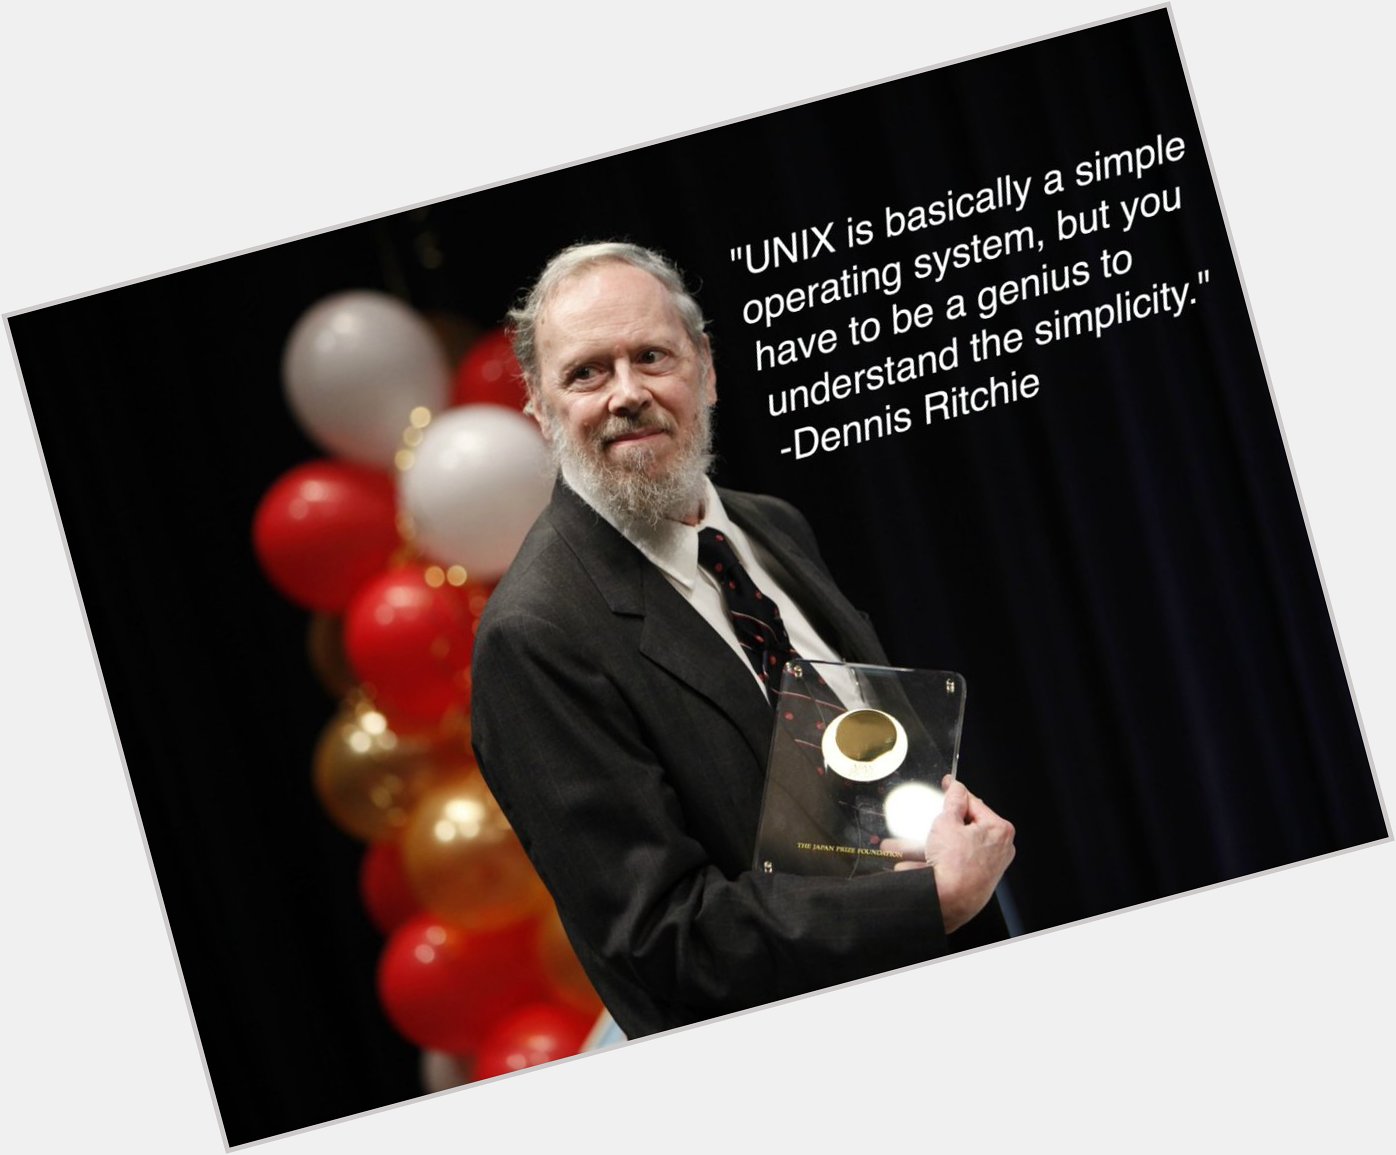 Happy bday to the late Dennis Ritchie, inventor of C and co-creator of Unix.  